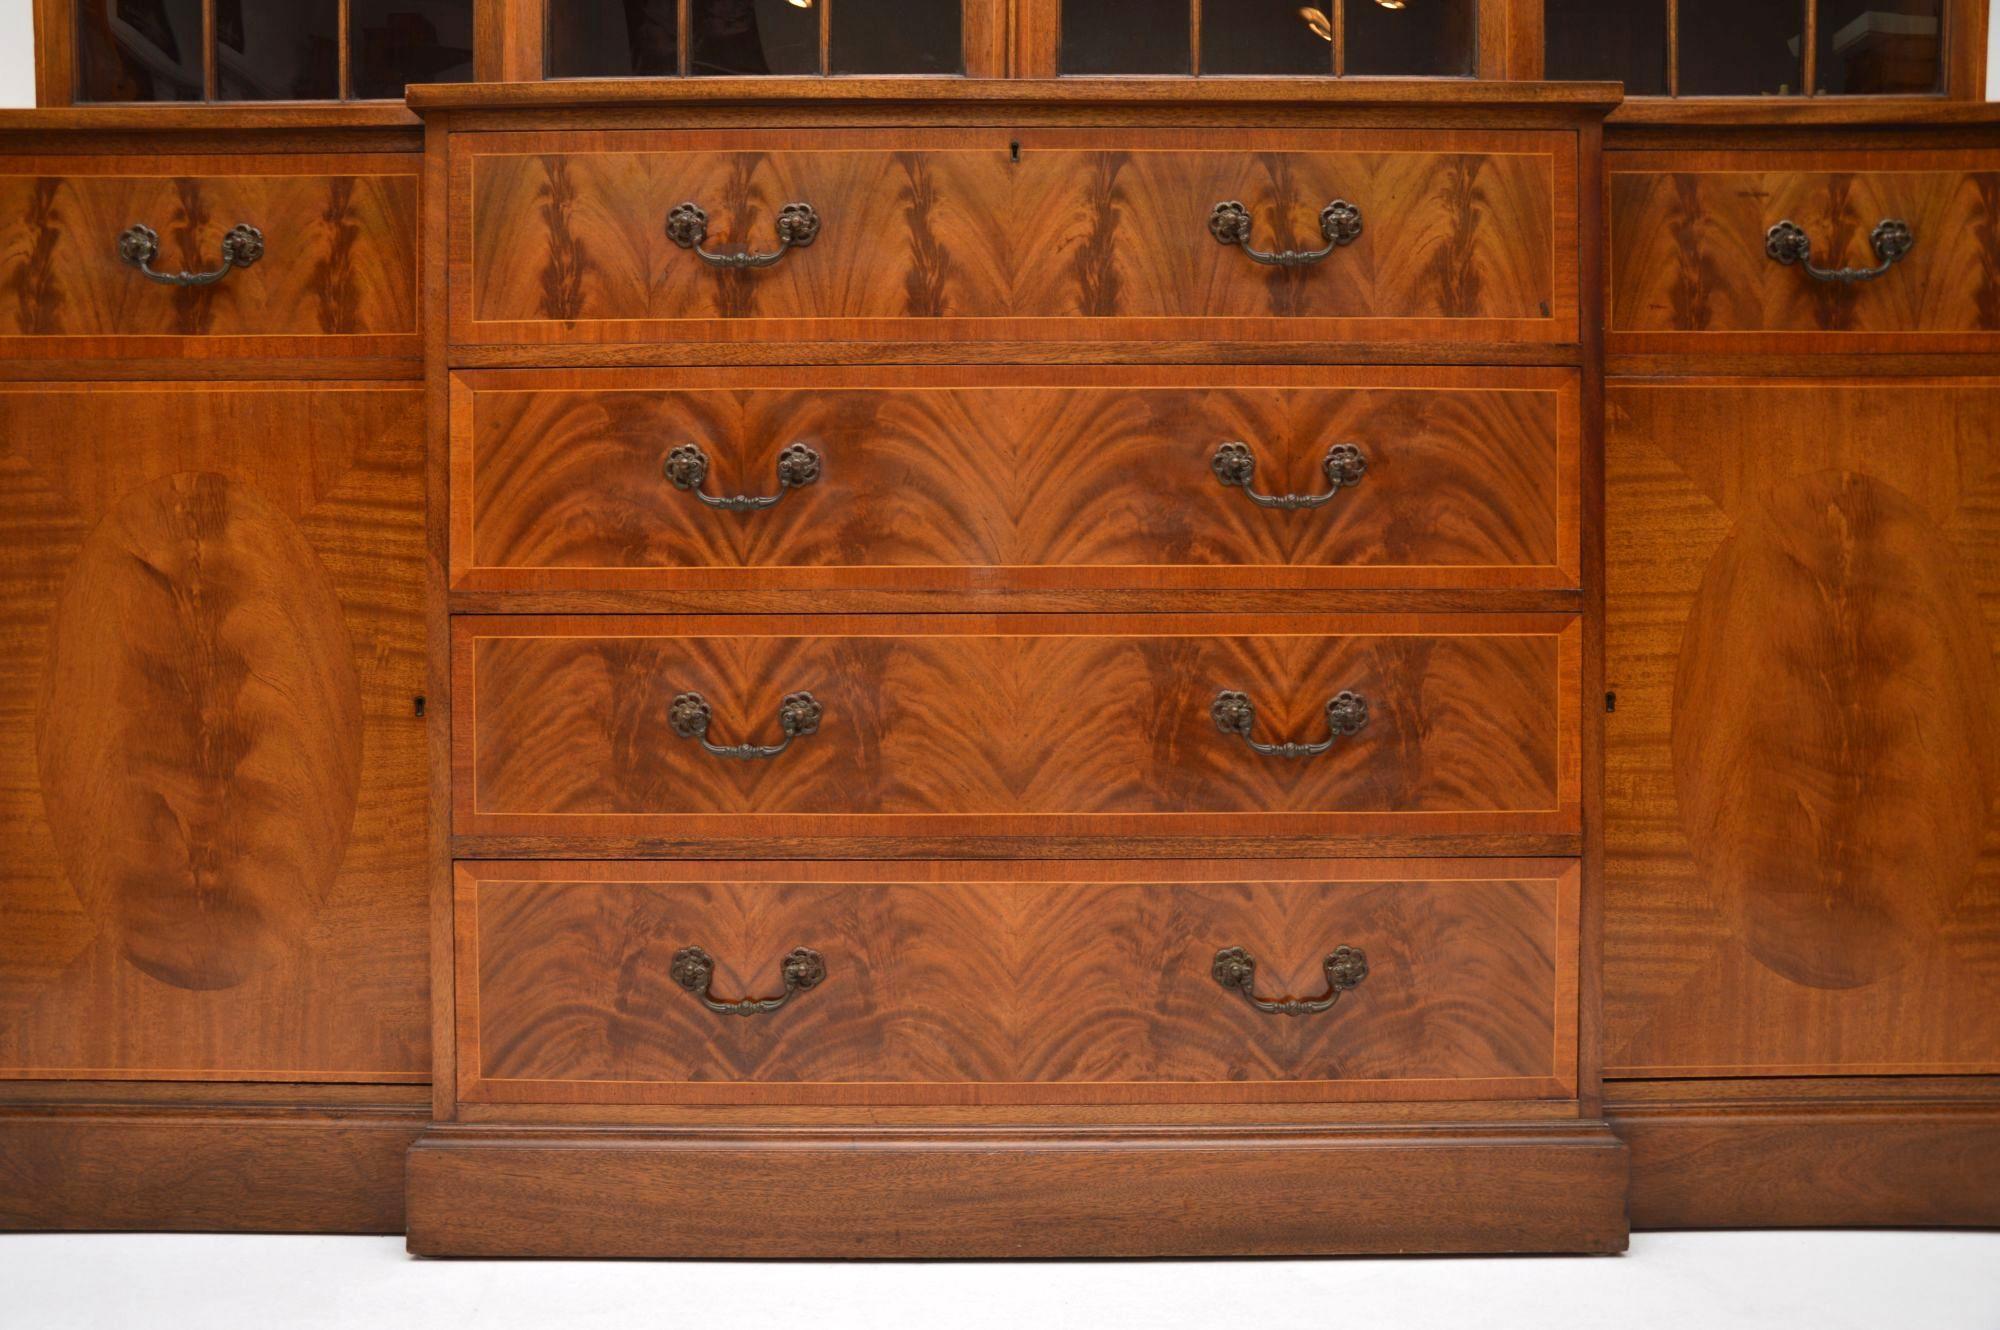 This large very impressive mahogany breakfront secretaire bookcase is antique Georgian style dating from around the 1950s period and it’s of very high quality. Please enlarge all the images to appreciate all the fine details. It has dental moulding